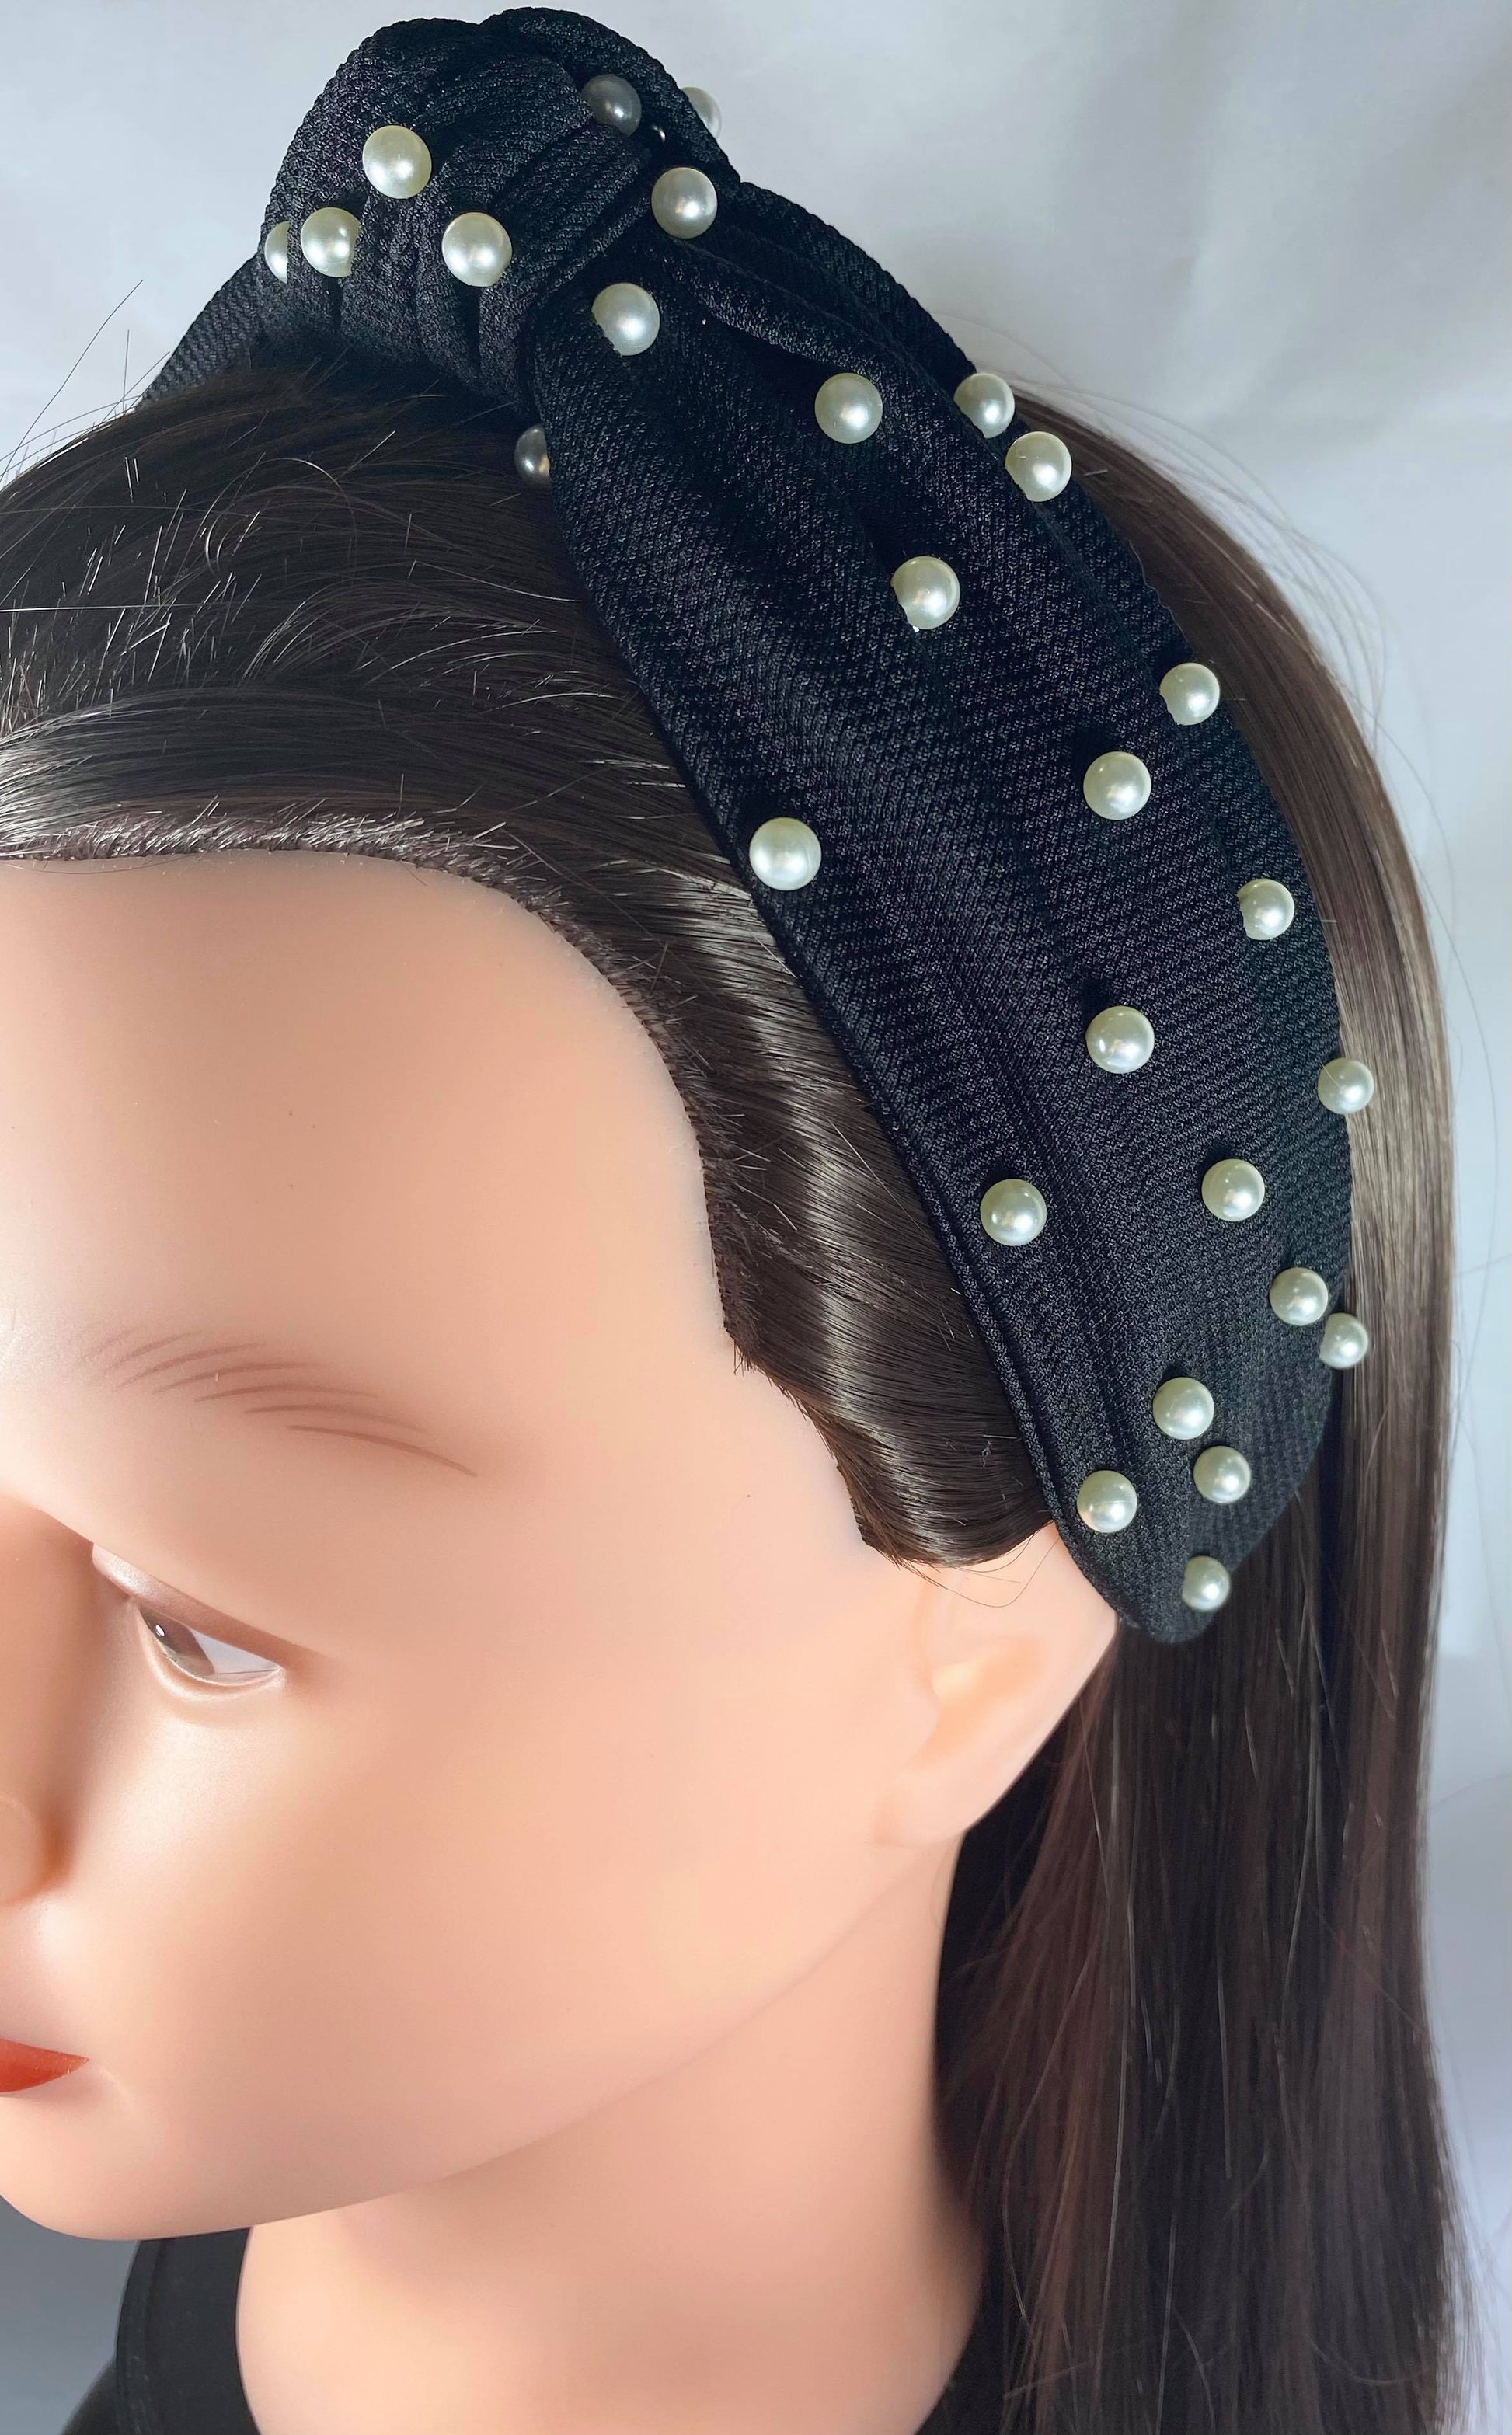 Black Pearl Knotted Headband with Perls 